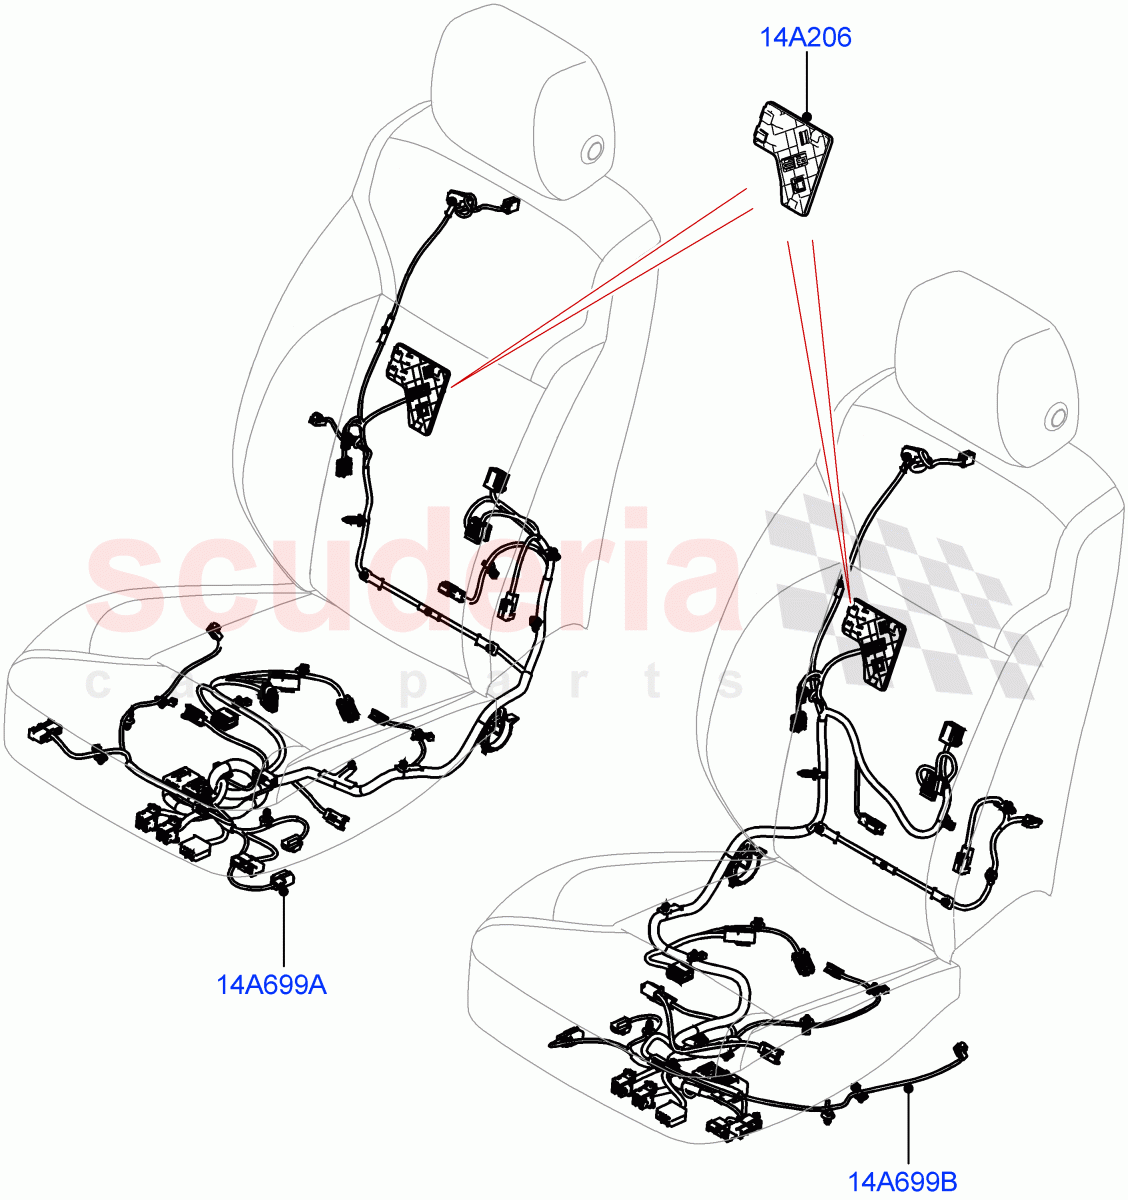 Wiring - Seats(Front Seats)((V)FROMMA000001) of Land Rover Land Rover Range Rover Velar (2017+) [3.0 Diesel 24V DOHC TC]